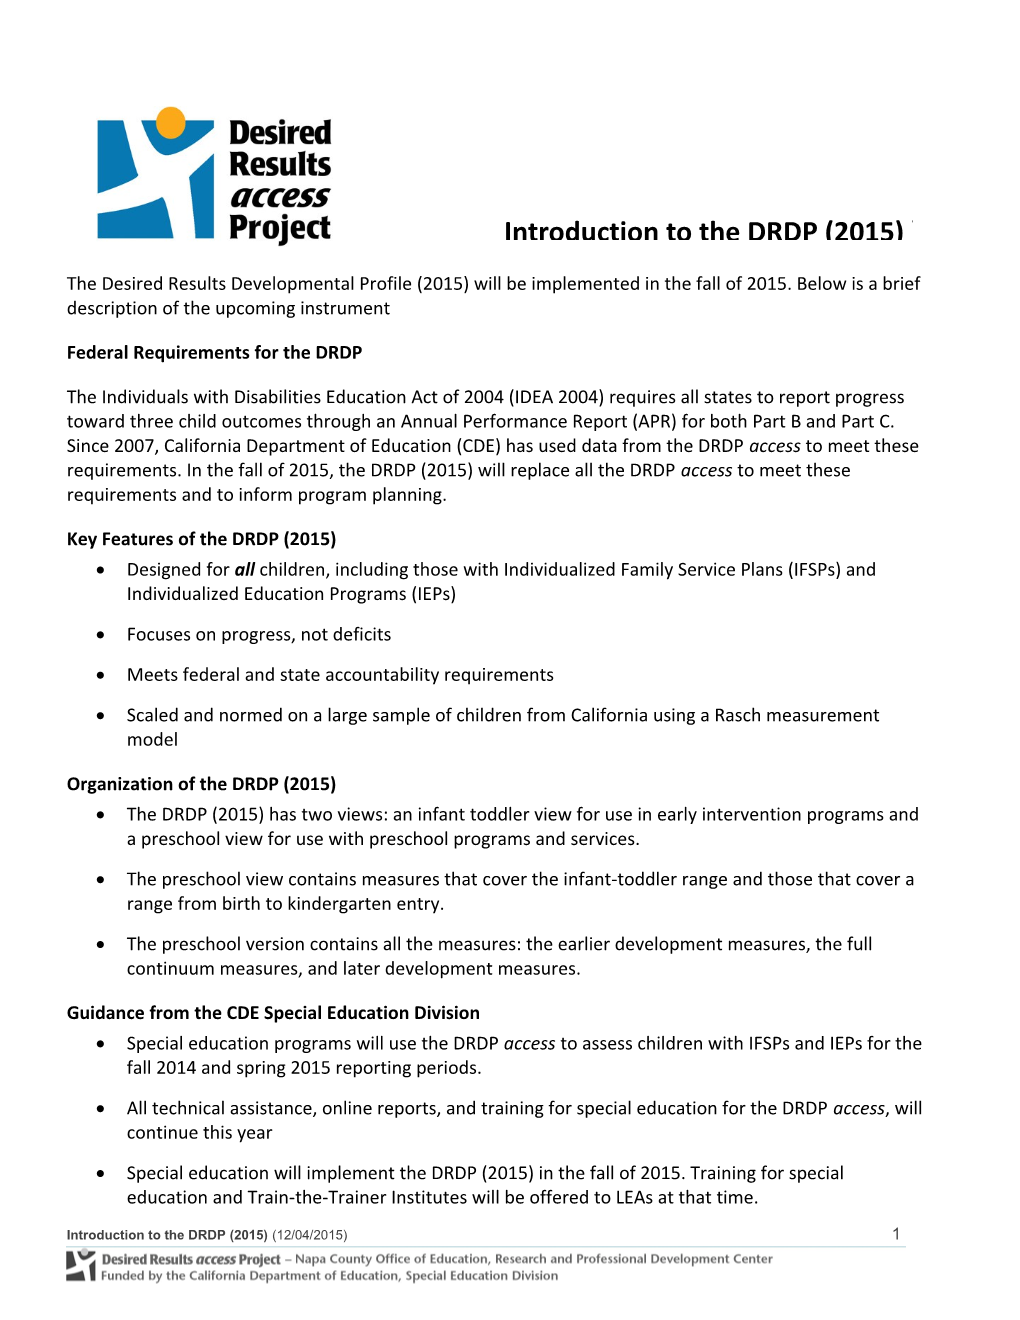 Federal Requirements for the DRDP